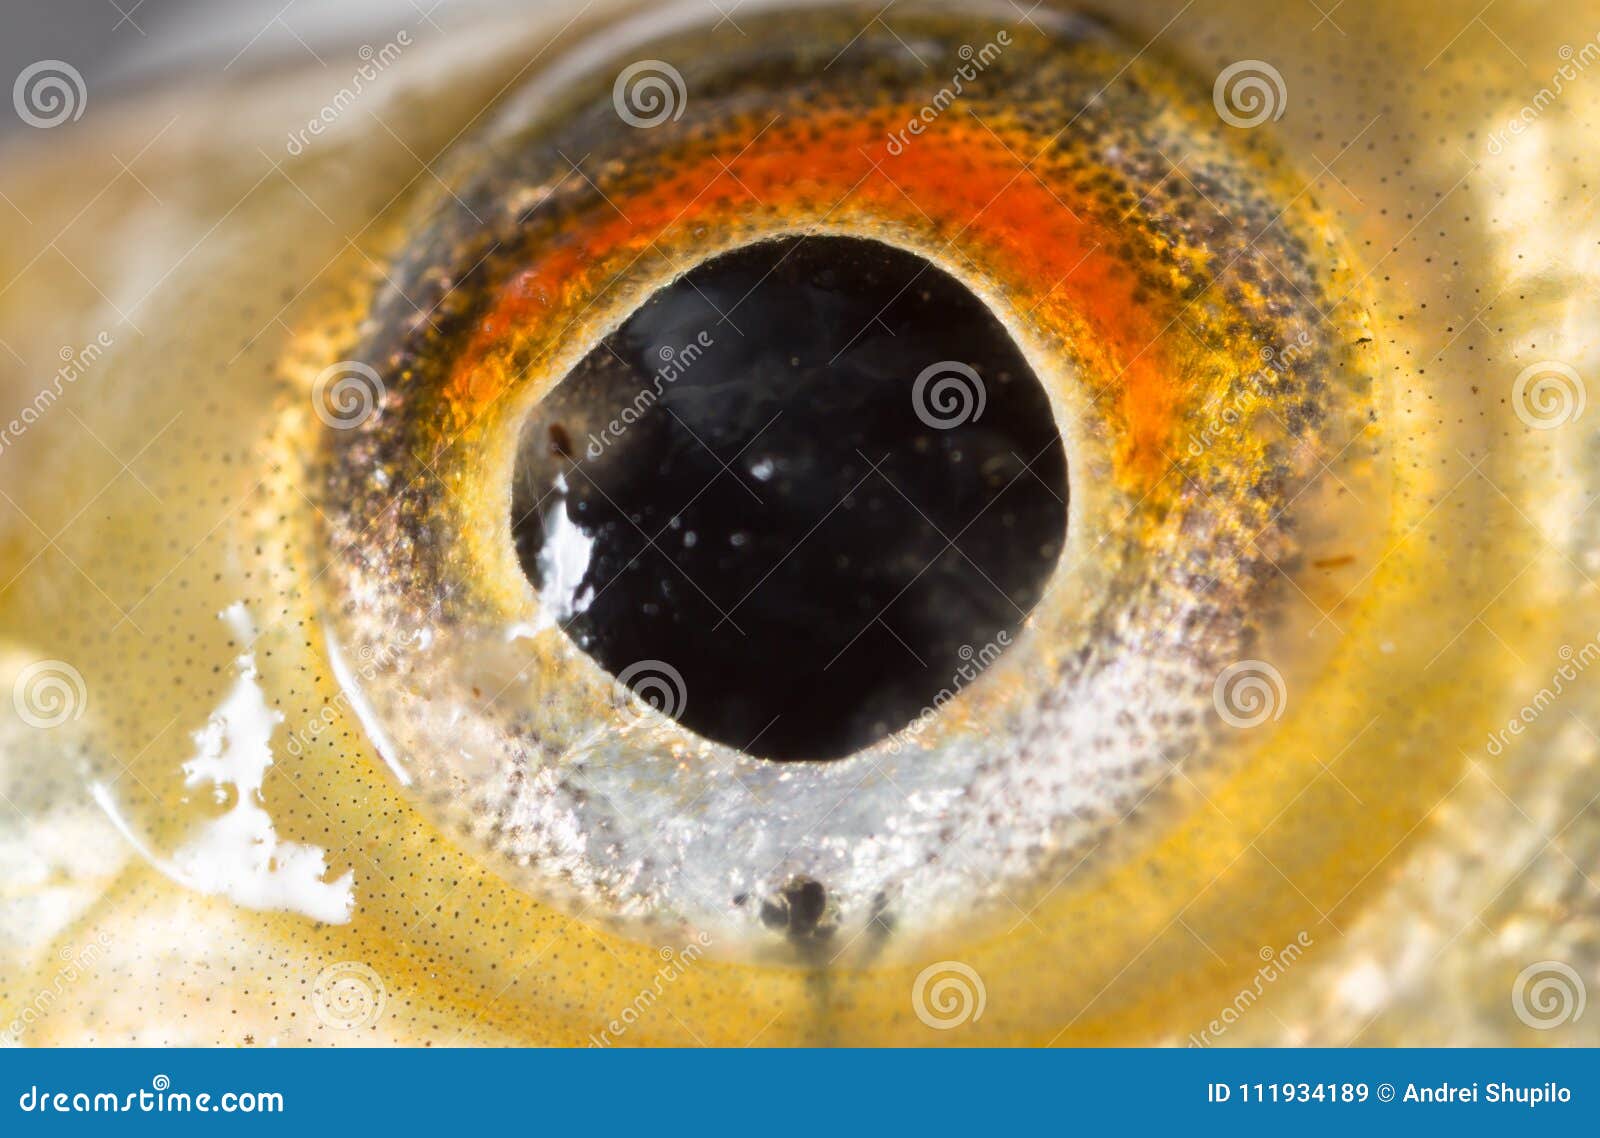 22 997 Fish Eyes Photos Free Royalty Free Stock Photos From Dreamstime